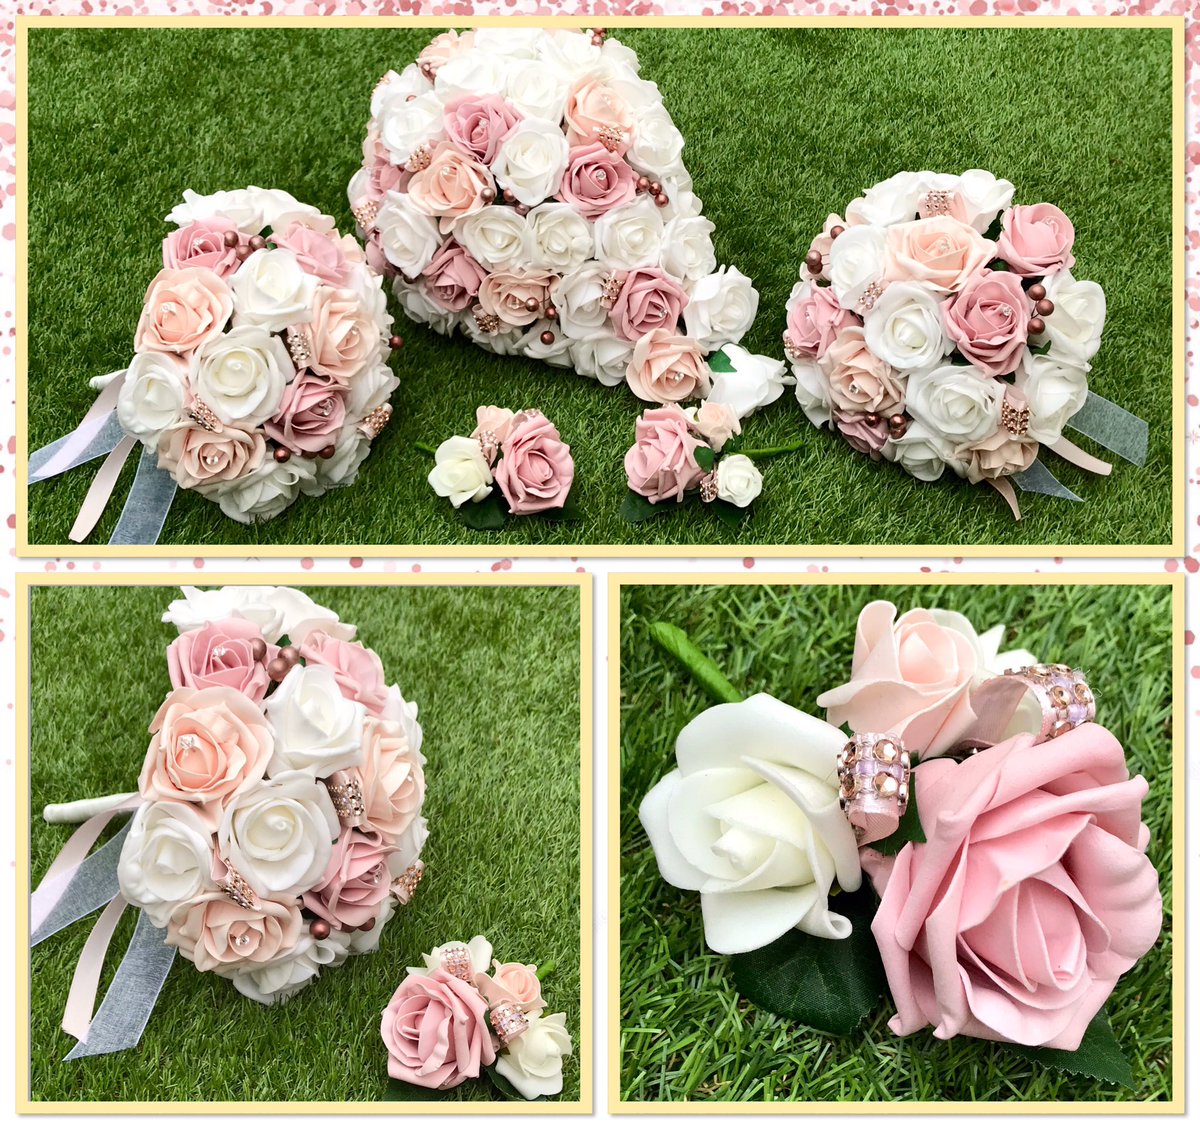 @KnitClaire One wedding for next Summer ready already, in Rose Gold, Ivory and baby pink #wedding #flowers #bridalbouquets #elevenseshour